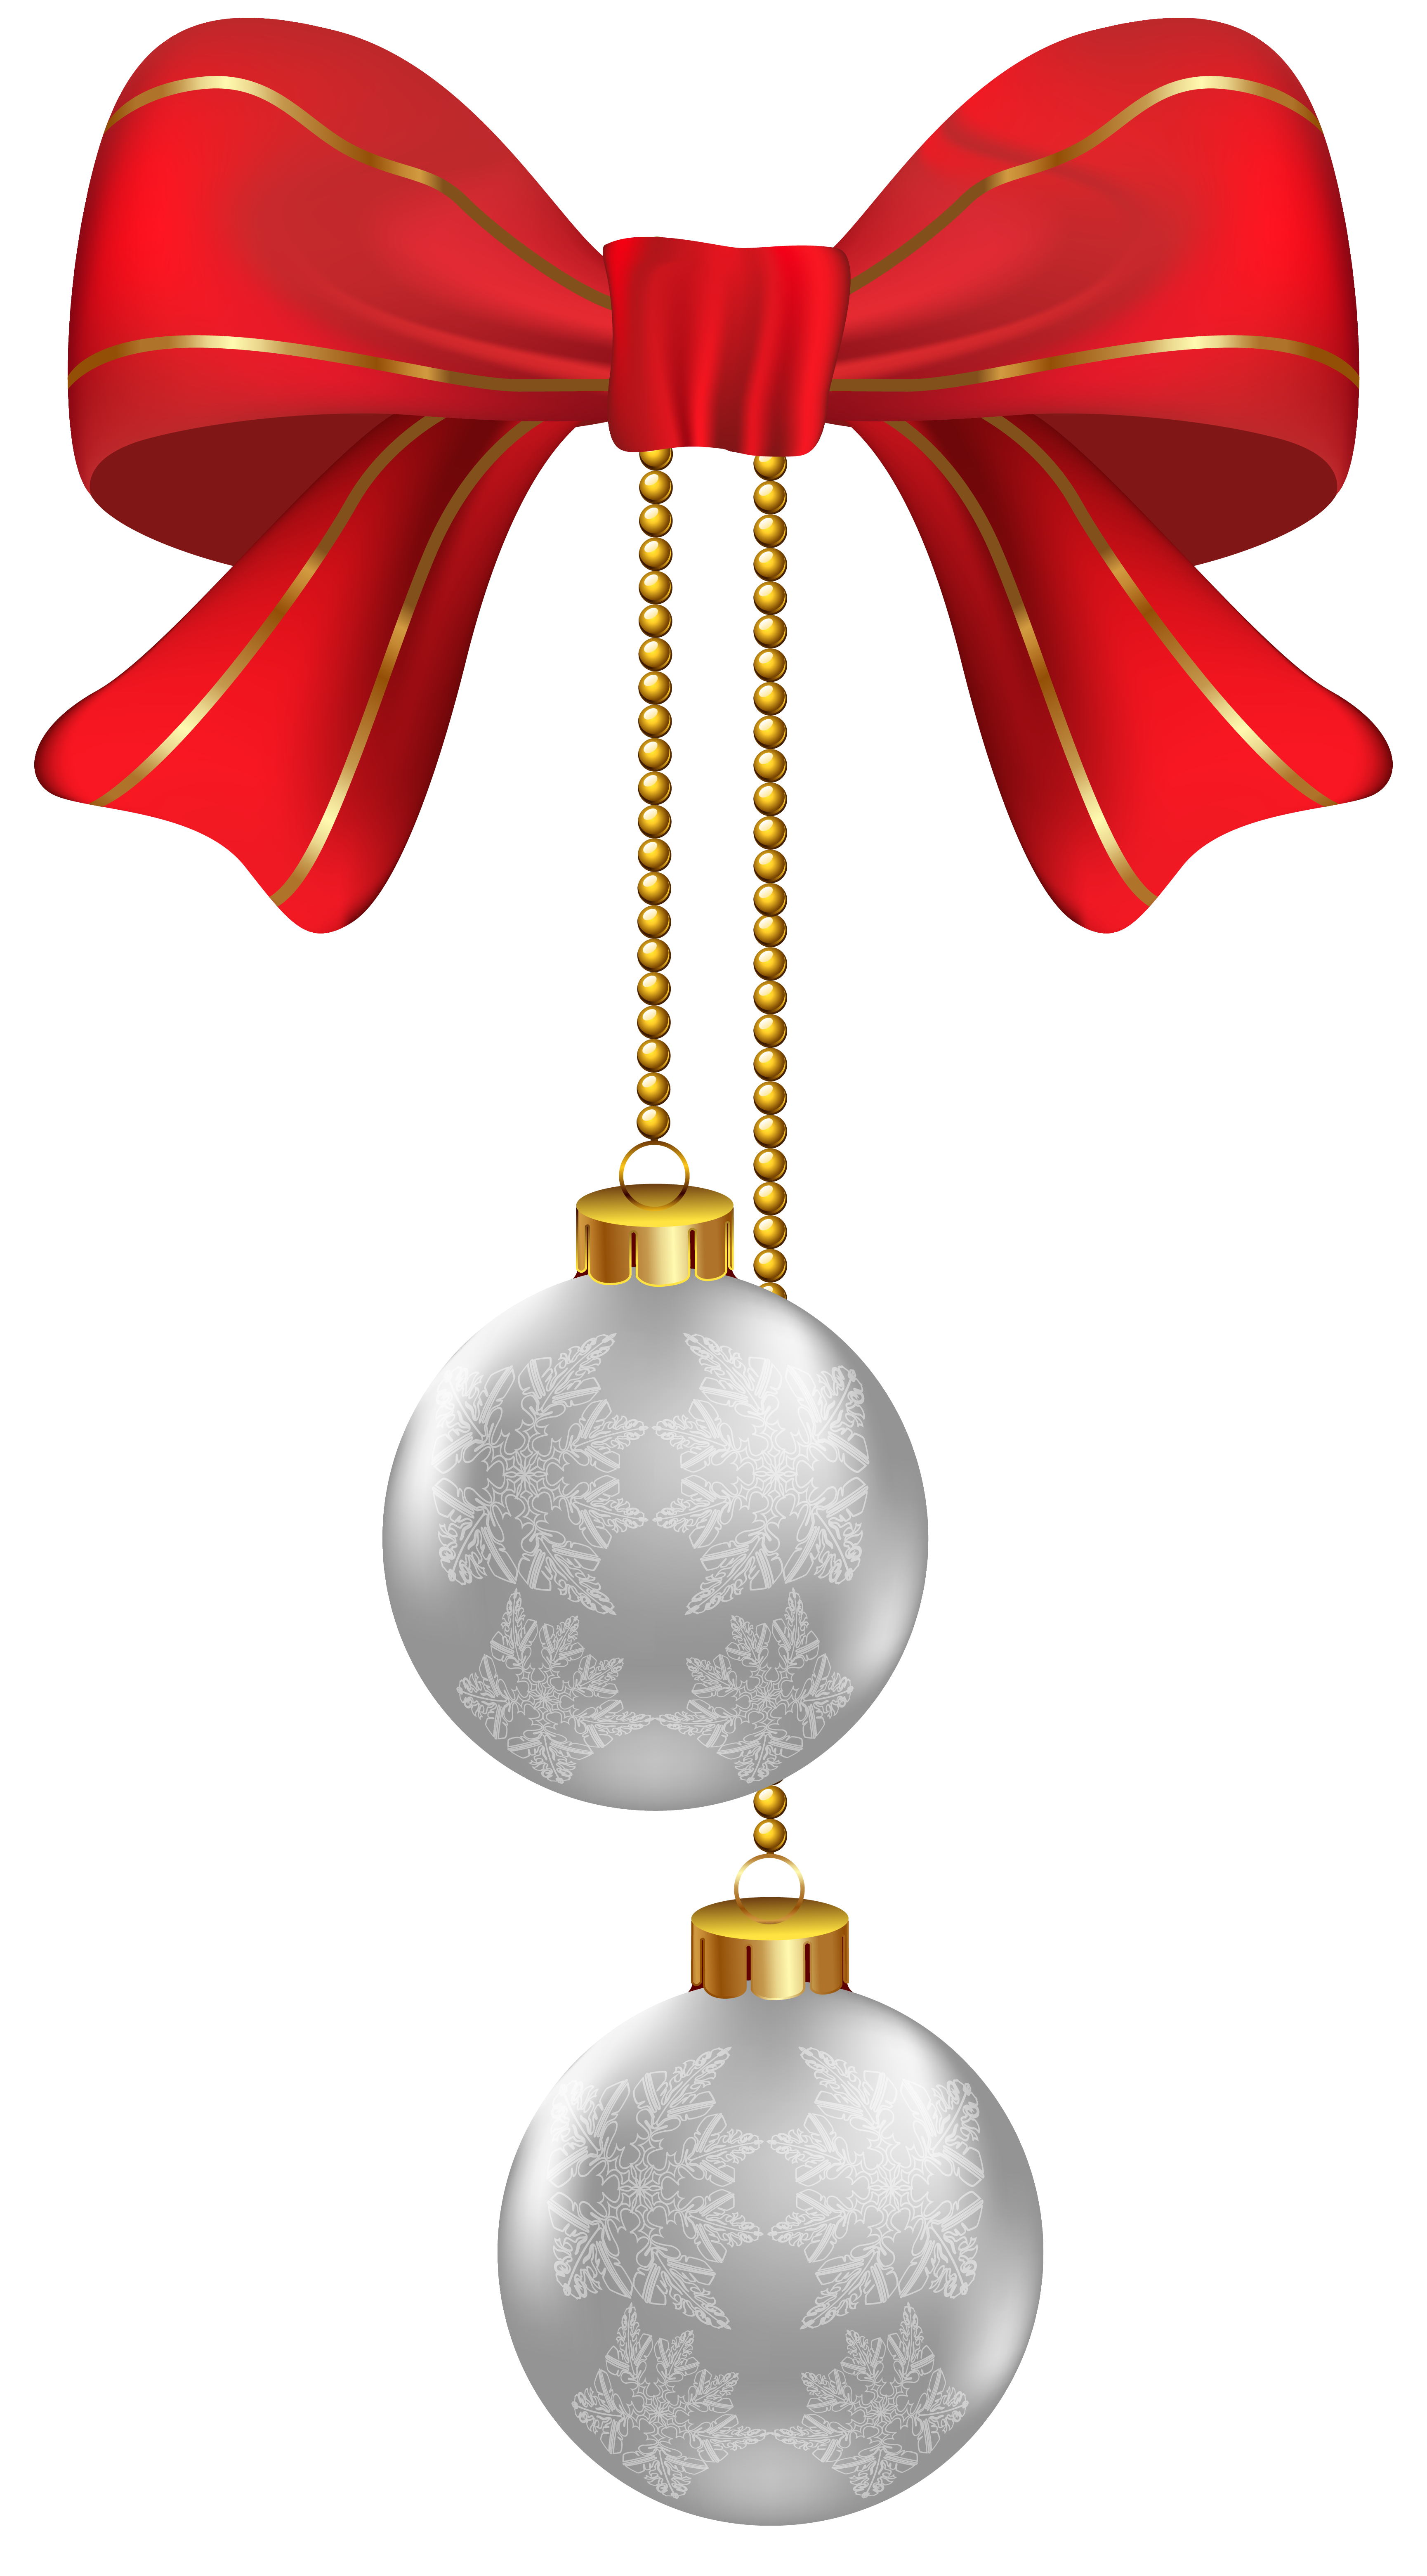 Hanging christmas silver ornaments. Winter clipart morning